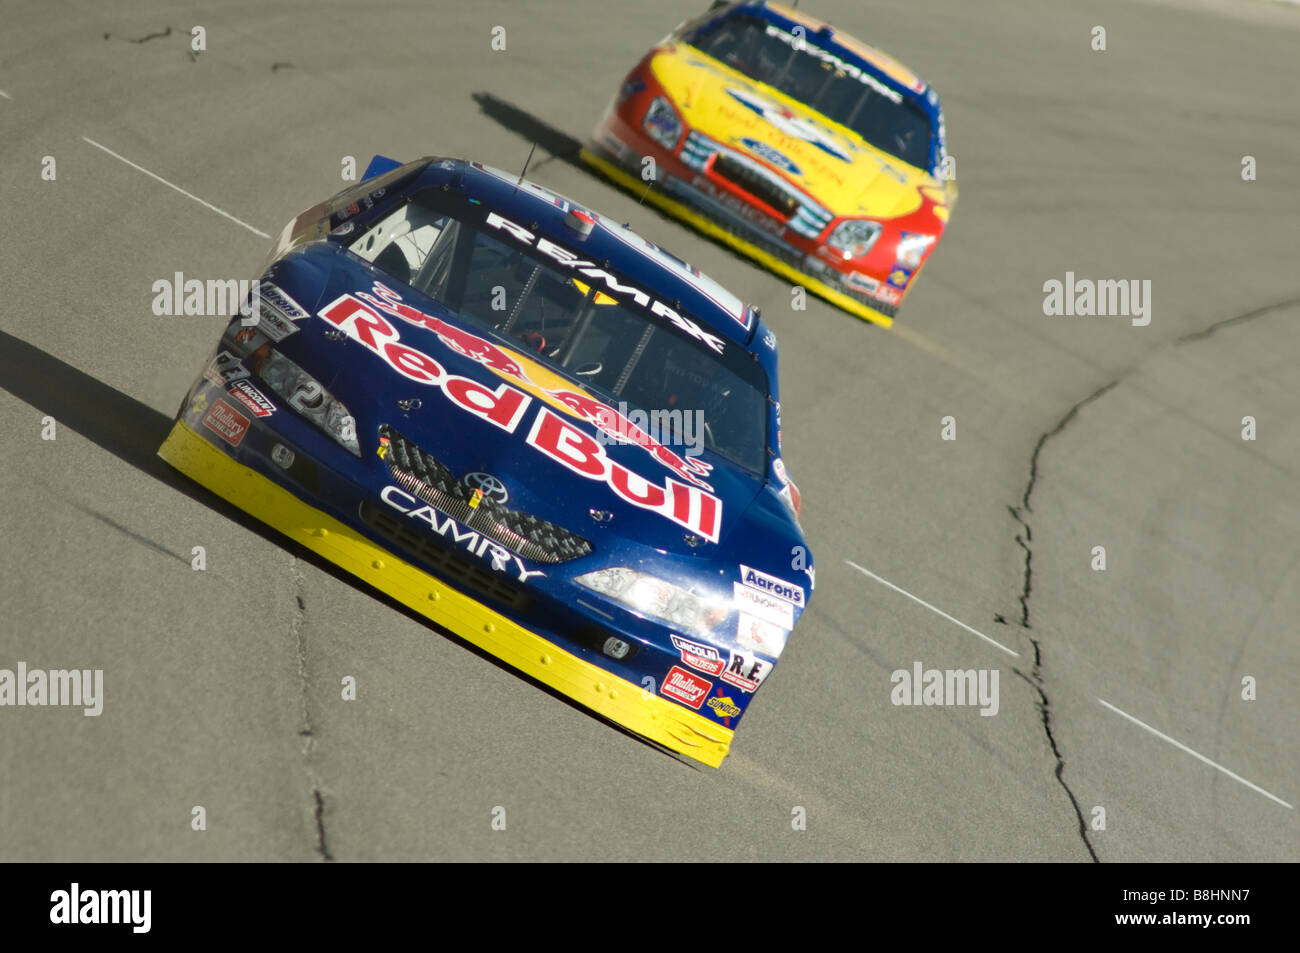 Scott Speed races the Red Bull Toyota Camry in the ARCA Re/Max race at Michigan International Speedway, 2008. Stock Photo